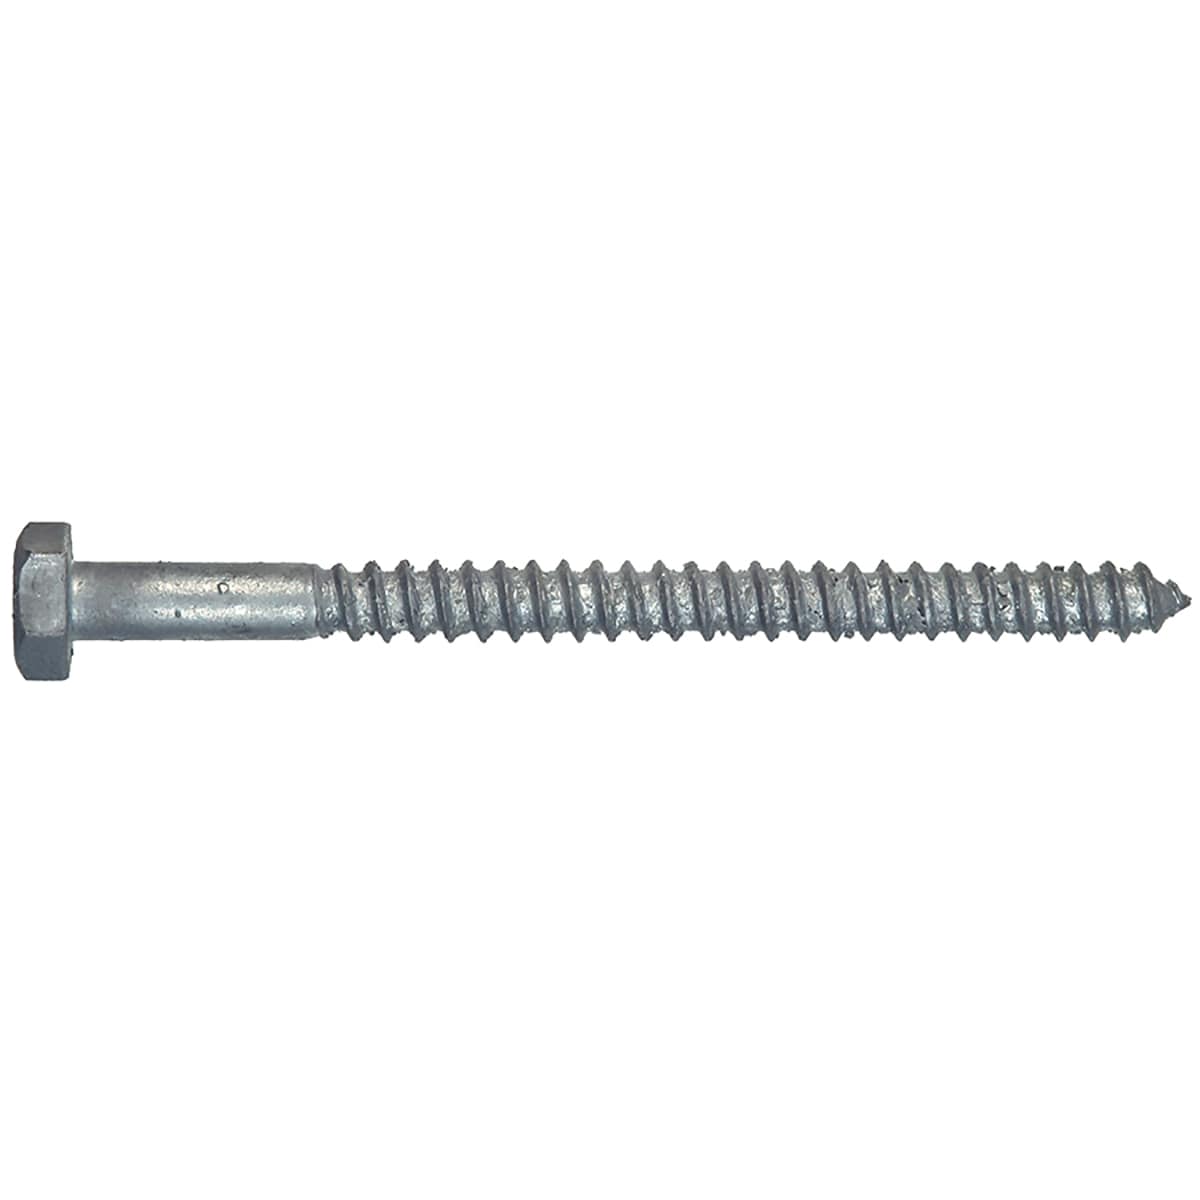 Lag Bolt Screw Hot Dipped Galvanized A307 Alloy Steel 1/2 x 4-1/2" Qty 100 